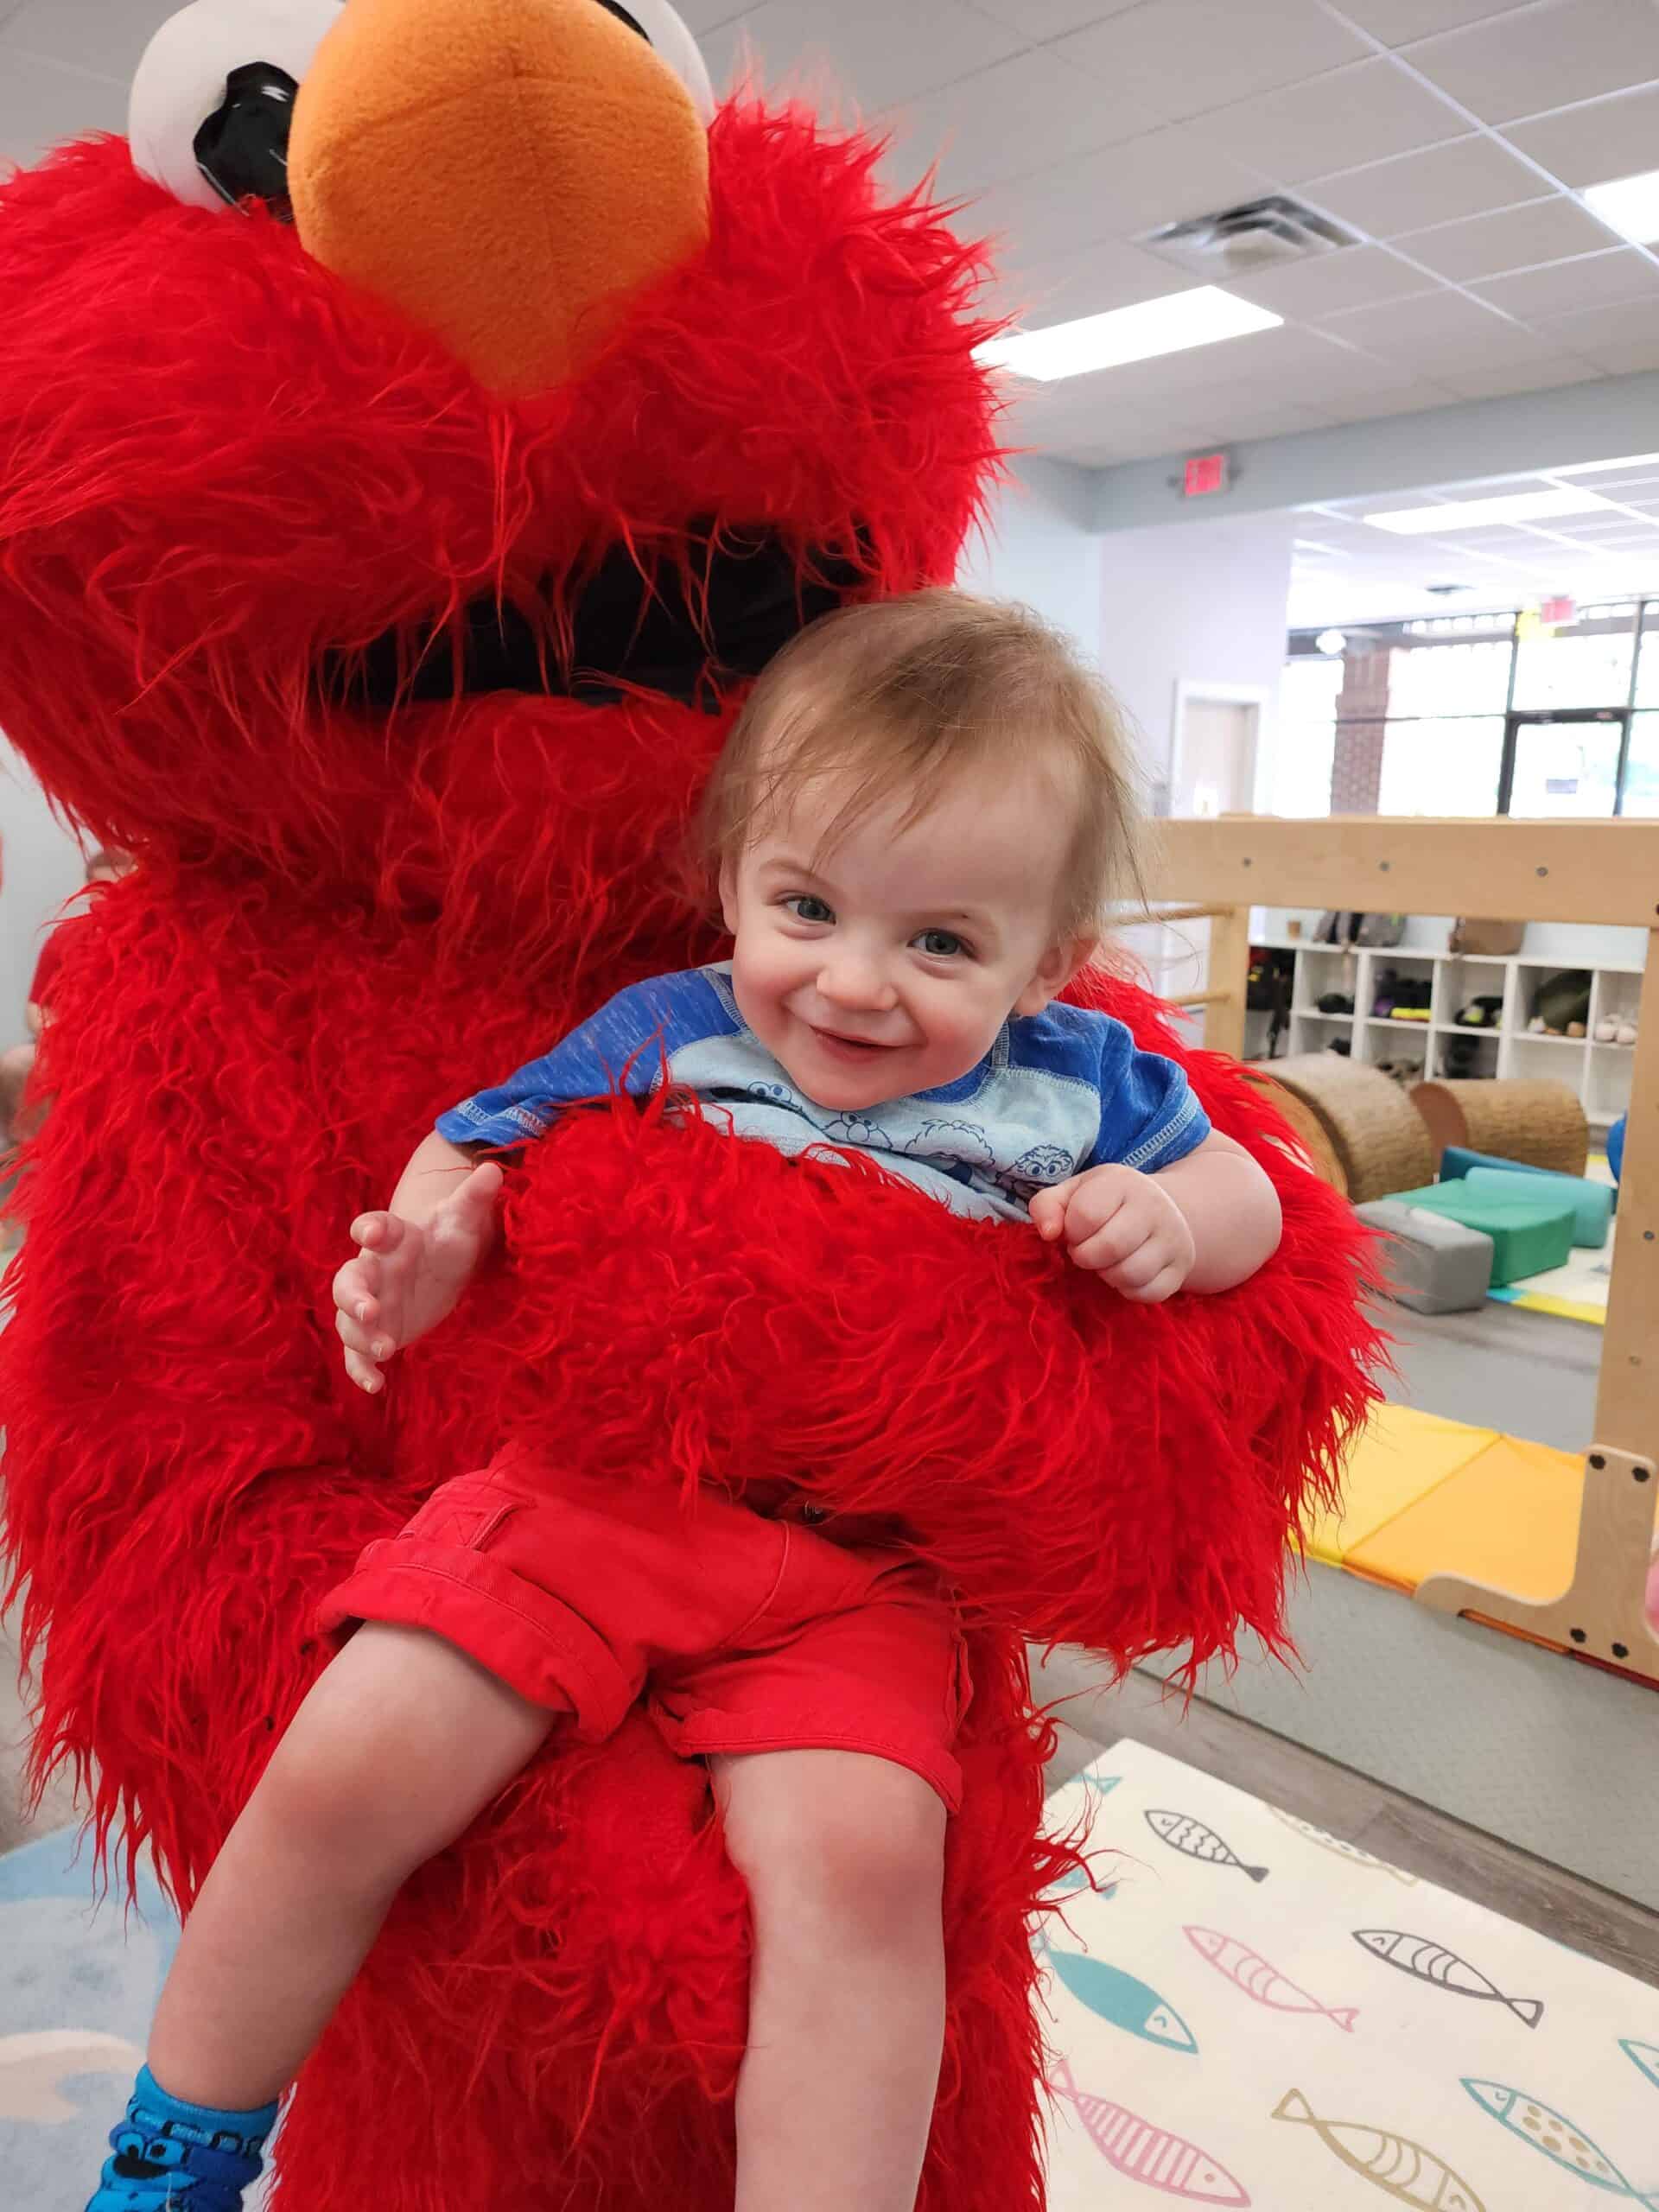 An elated toddler with a bright smile is held by a person in a fluffy, vibrant red costume at a children's indoor play area, conveying a moment of joy and playful interaction.